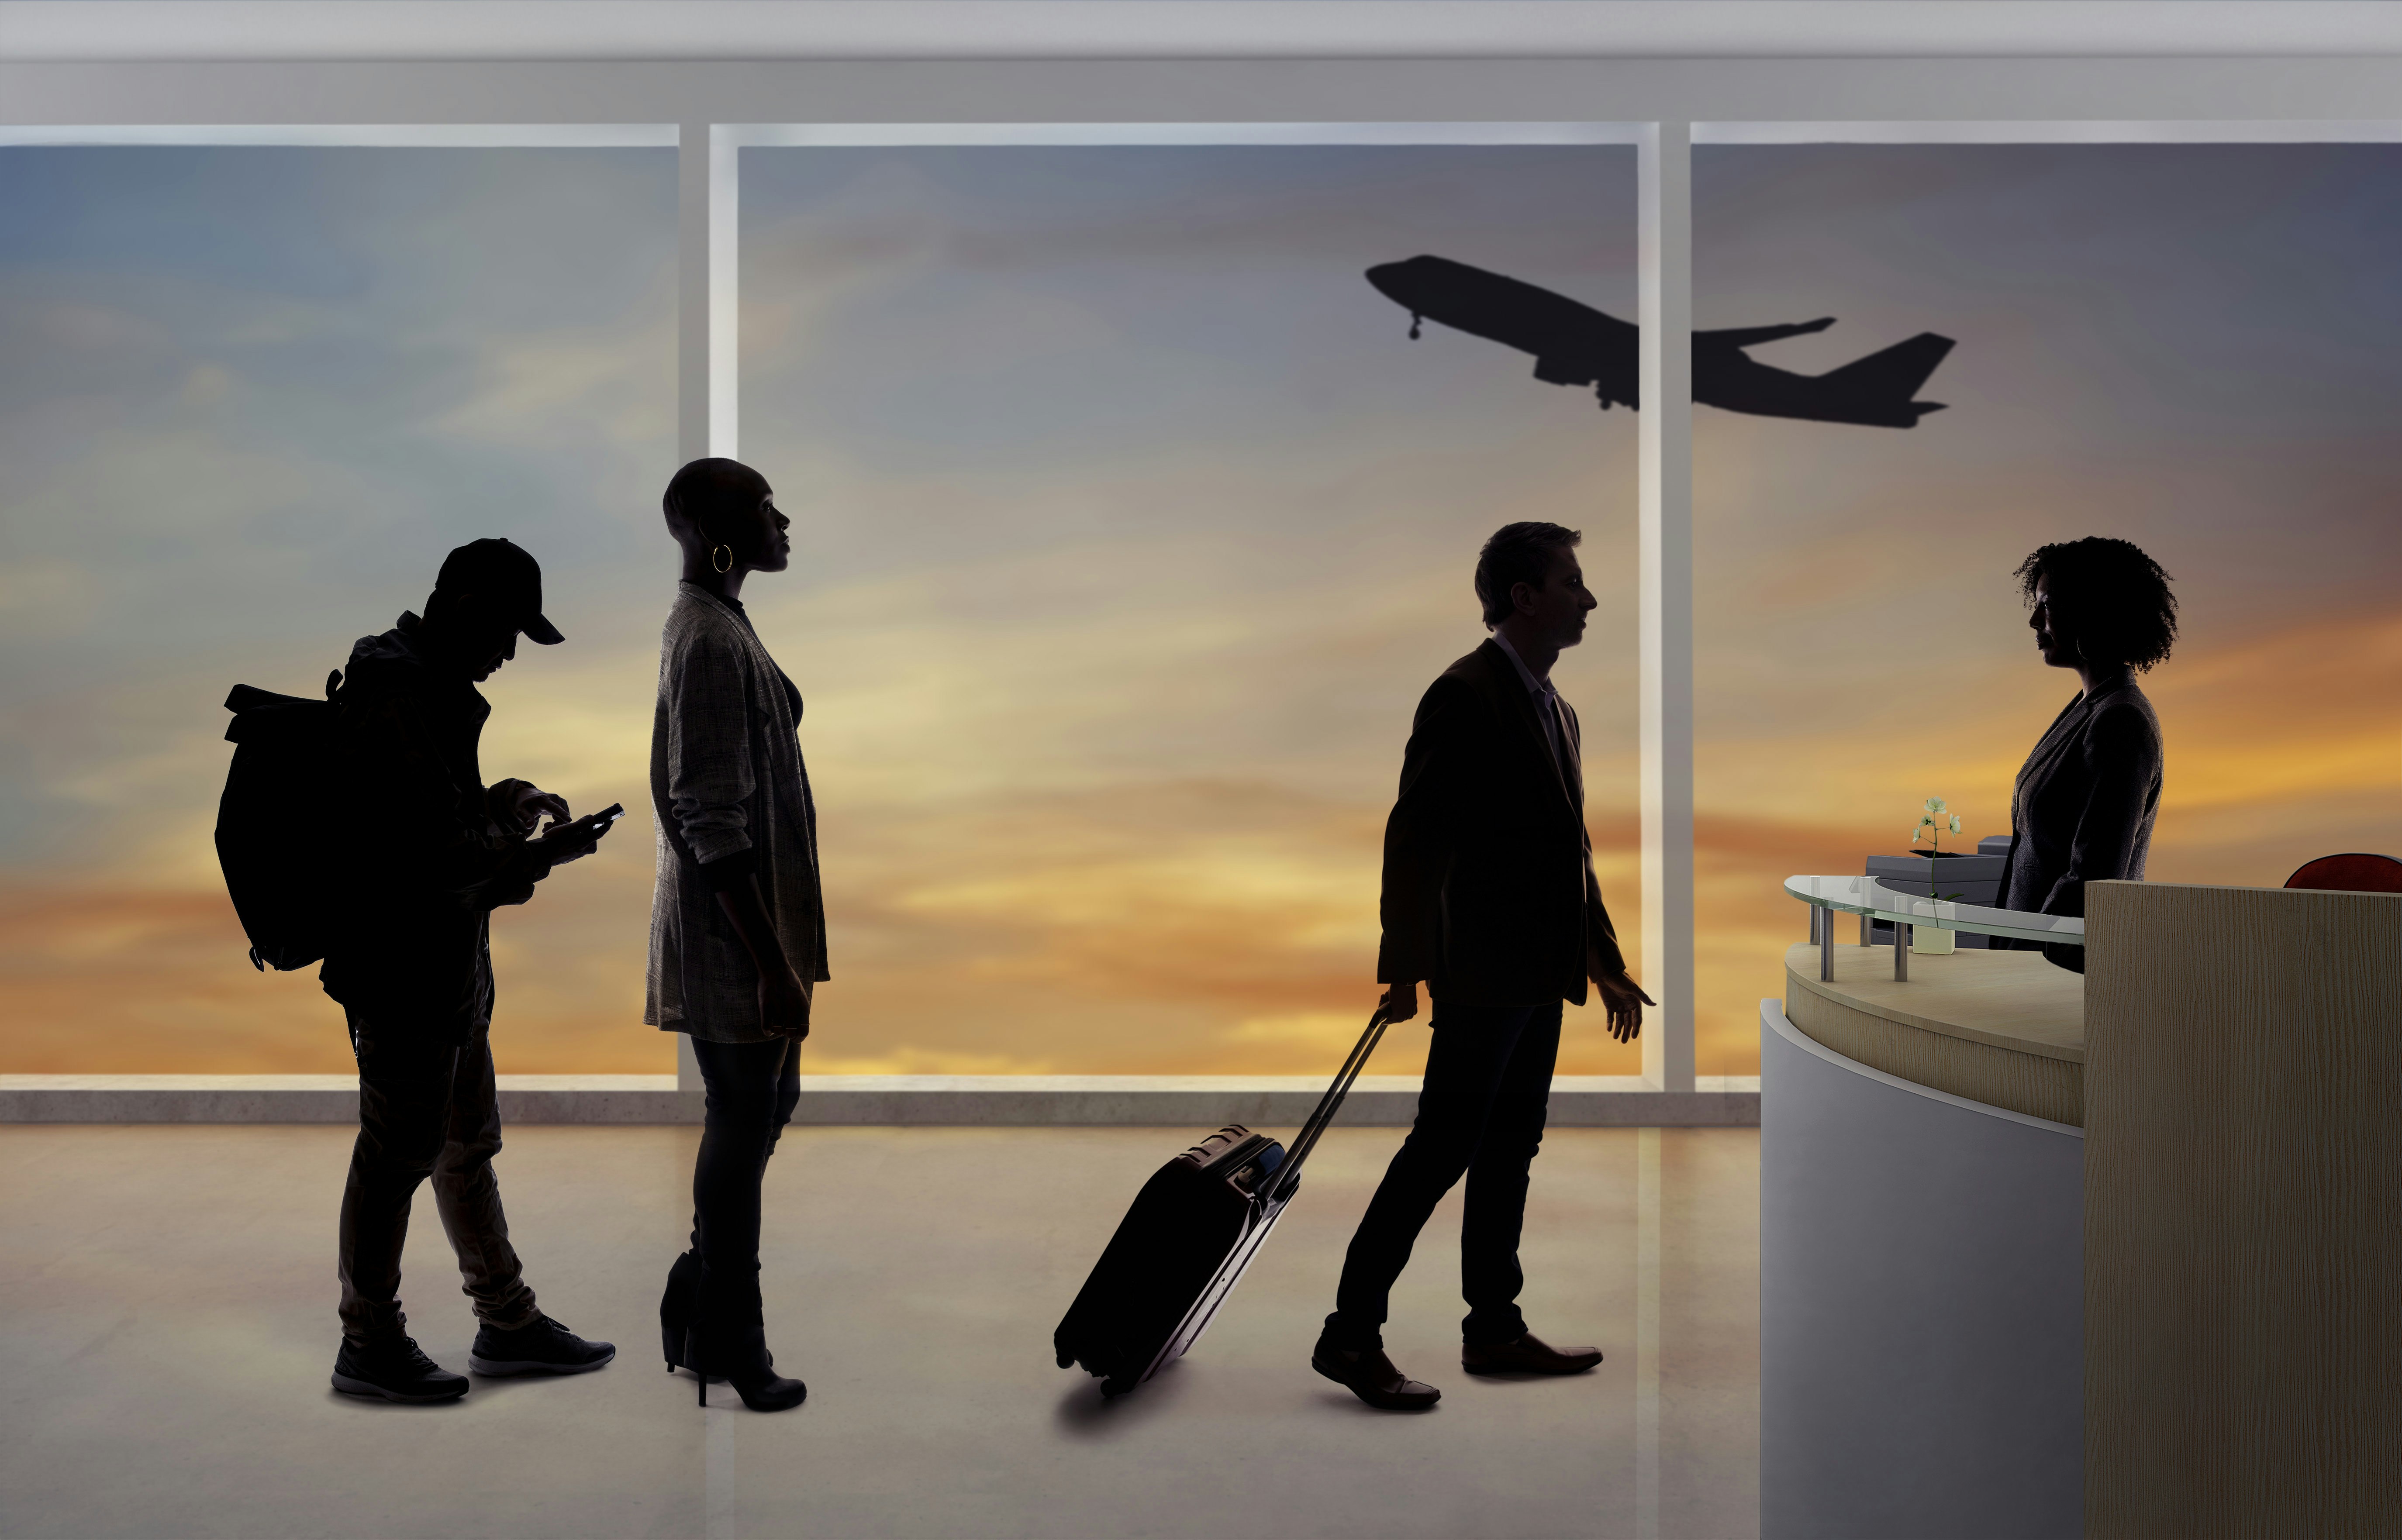 Illustration of silhouettes of passengers waiting in line at an airport check-in counter.